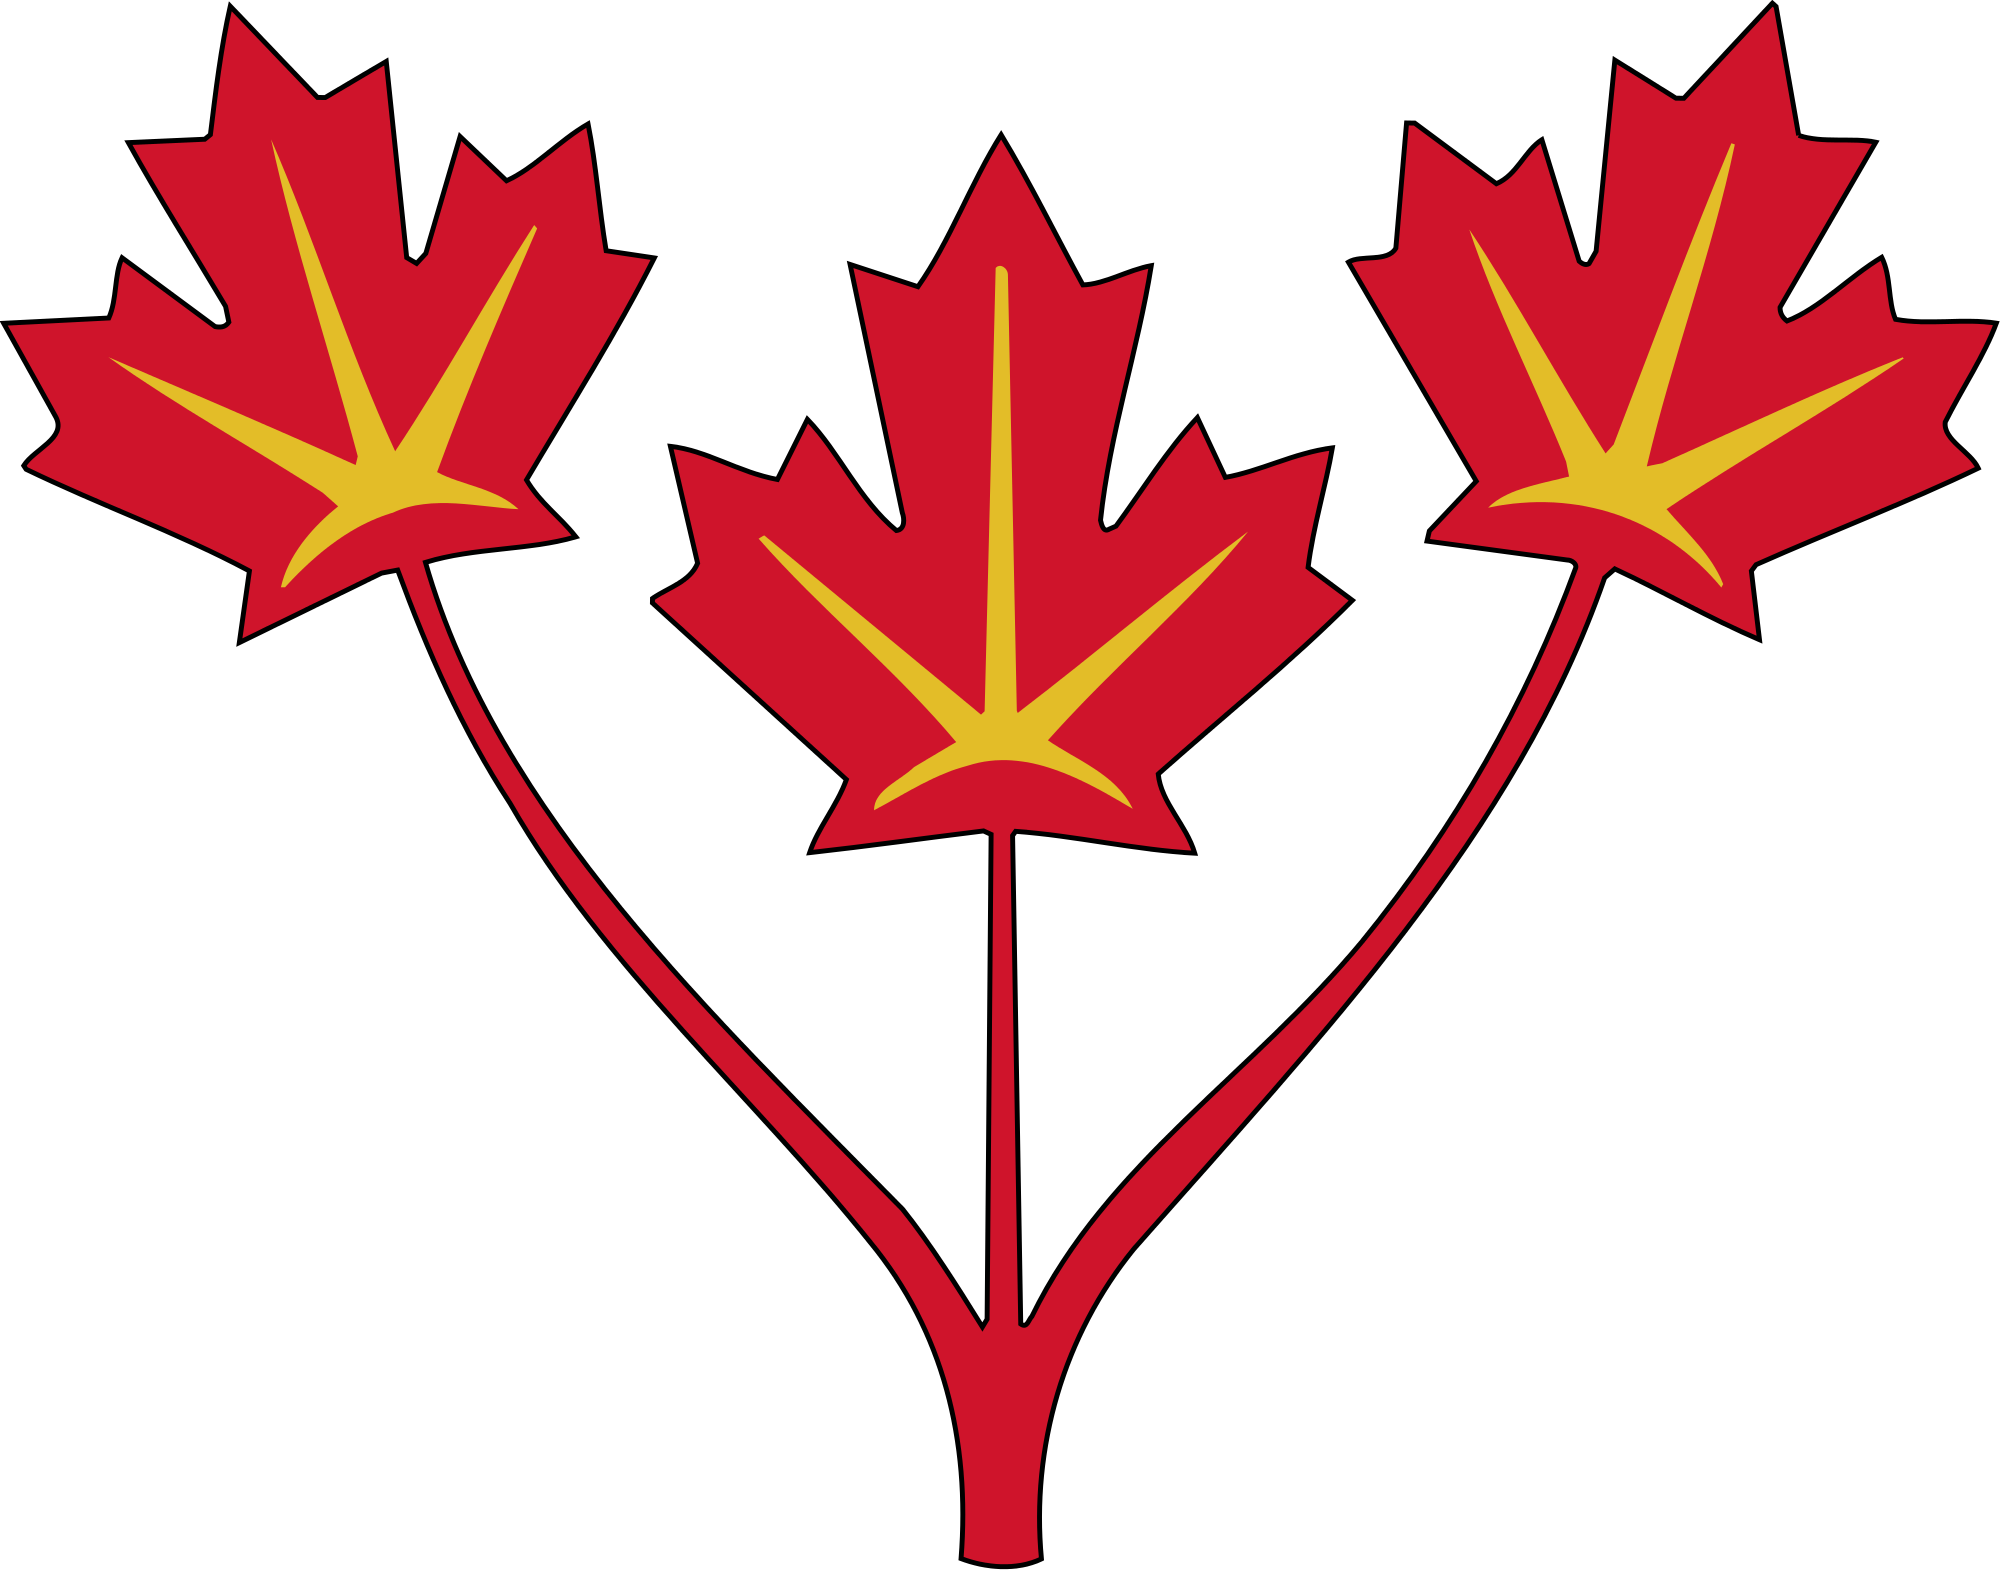 Three Maple Leaves Of Canada - Three Maple Leaf Flag, Hd Png Download